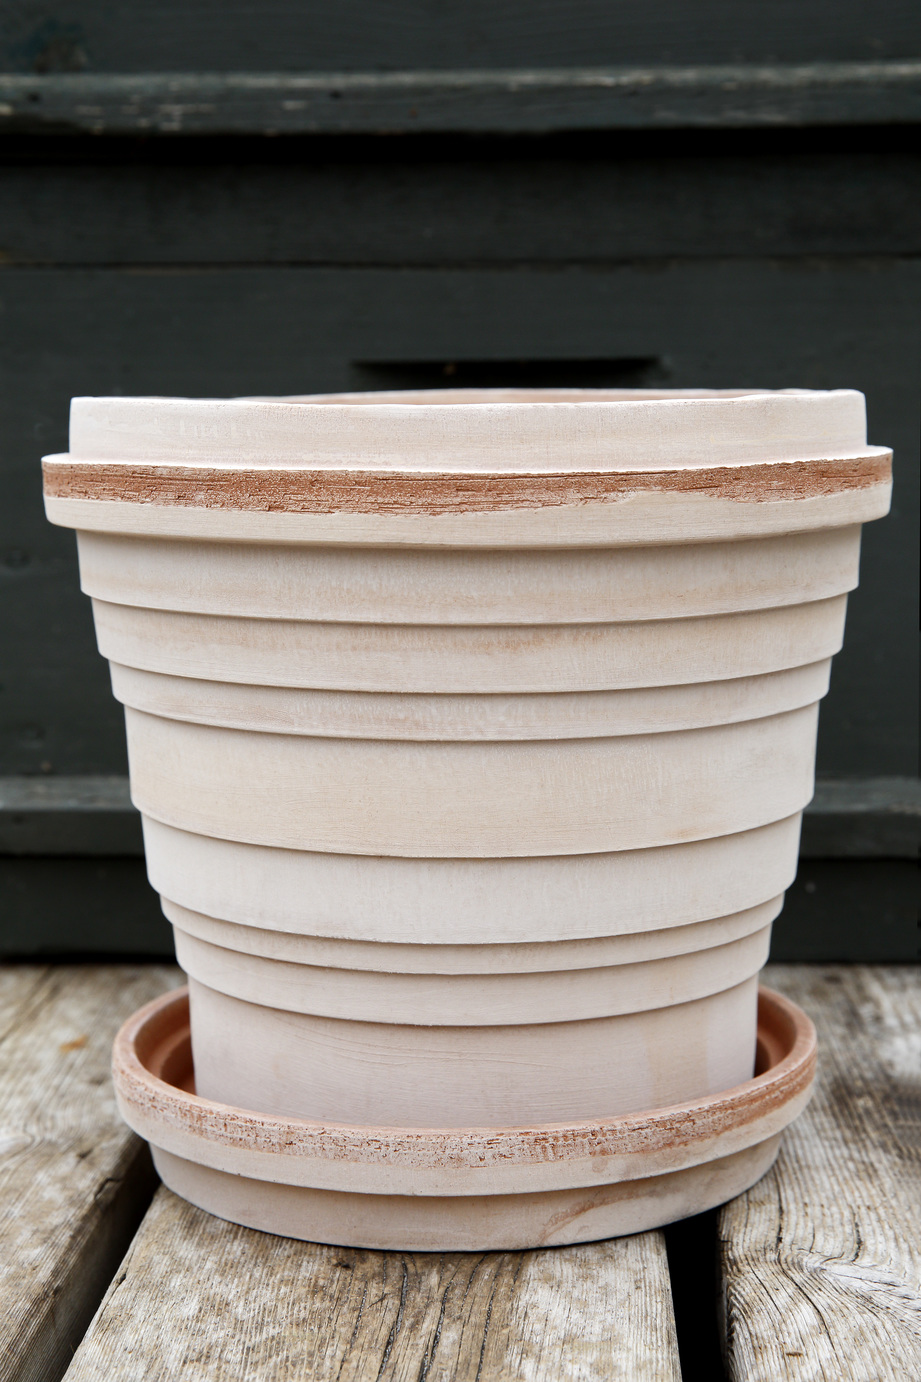 Raw rose terracotta pot made of layered rings in different sizes.